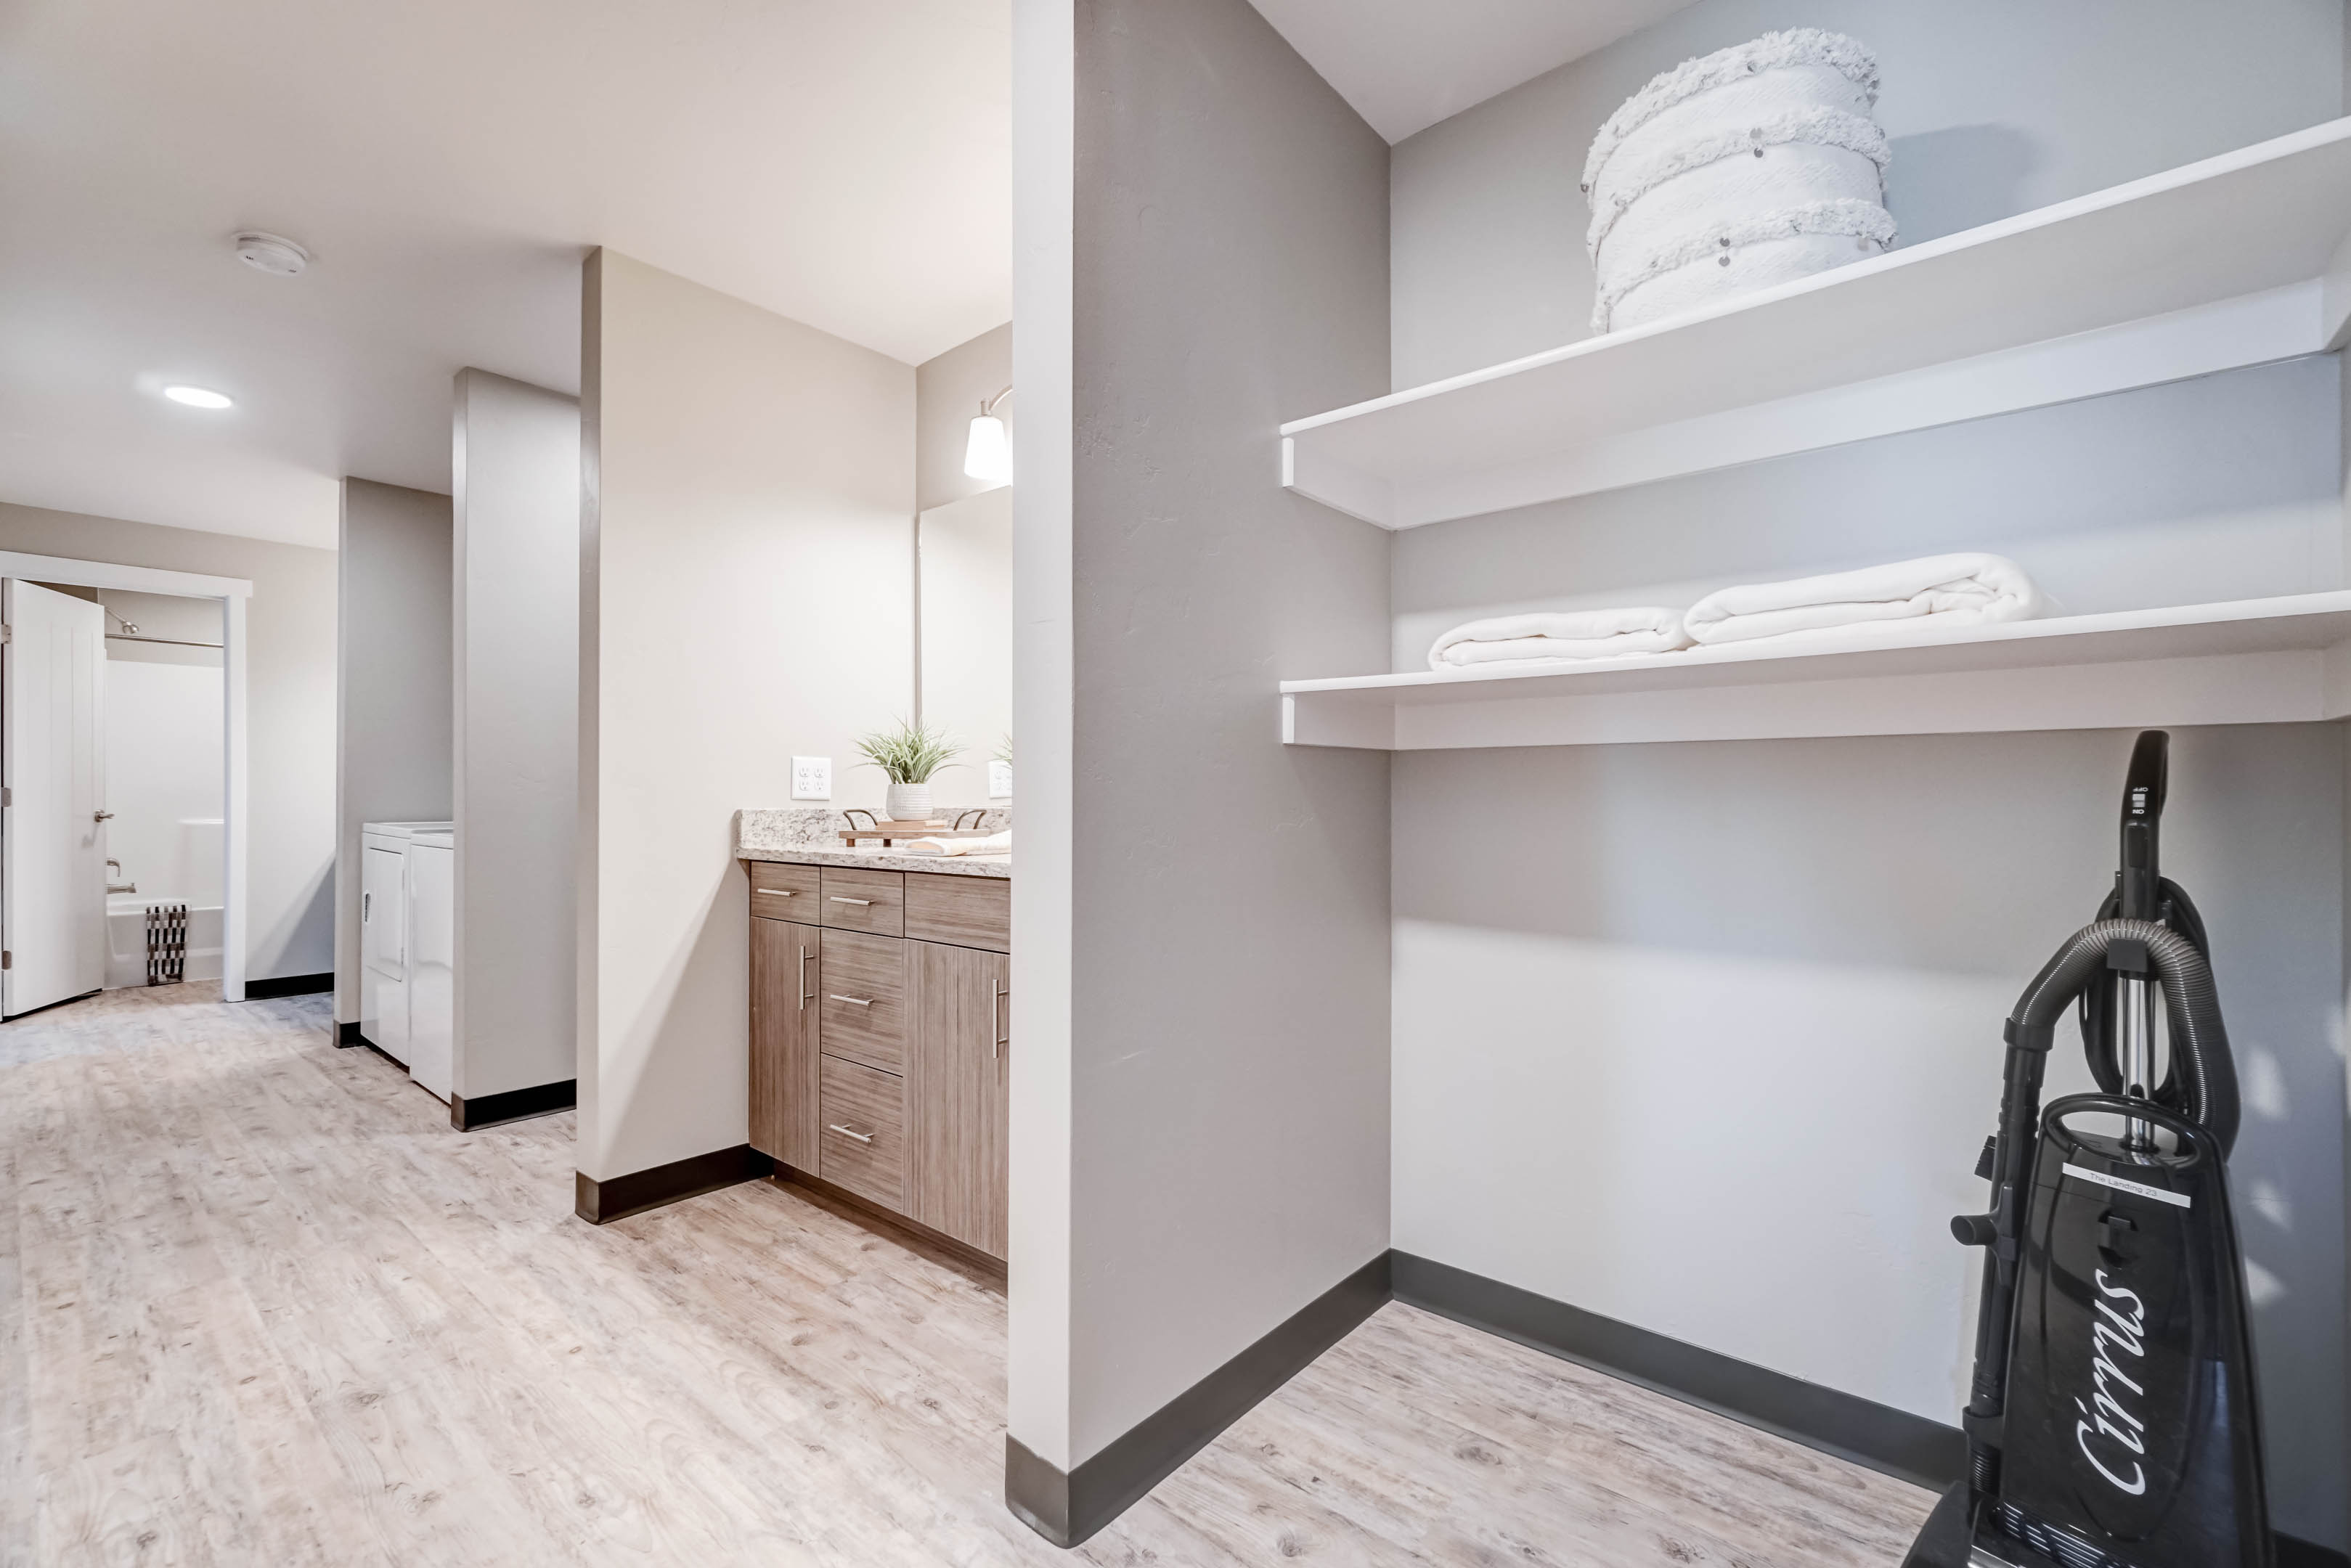 Next to one of the vanities you also have a spacious linen closet, great for storage!